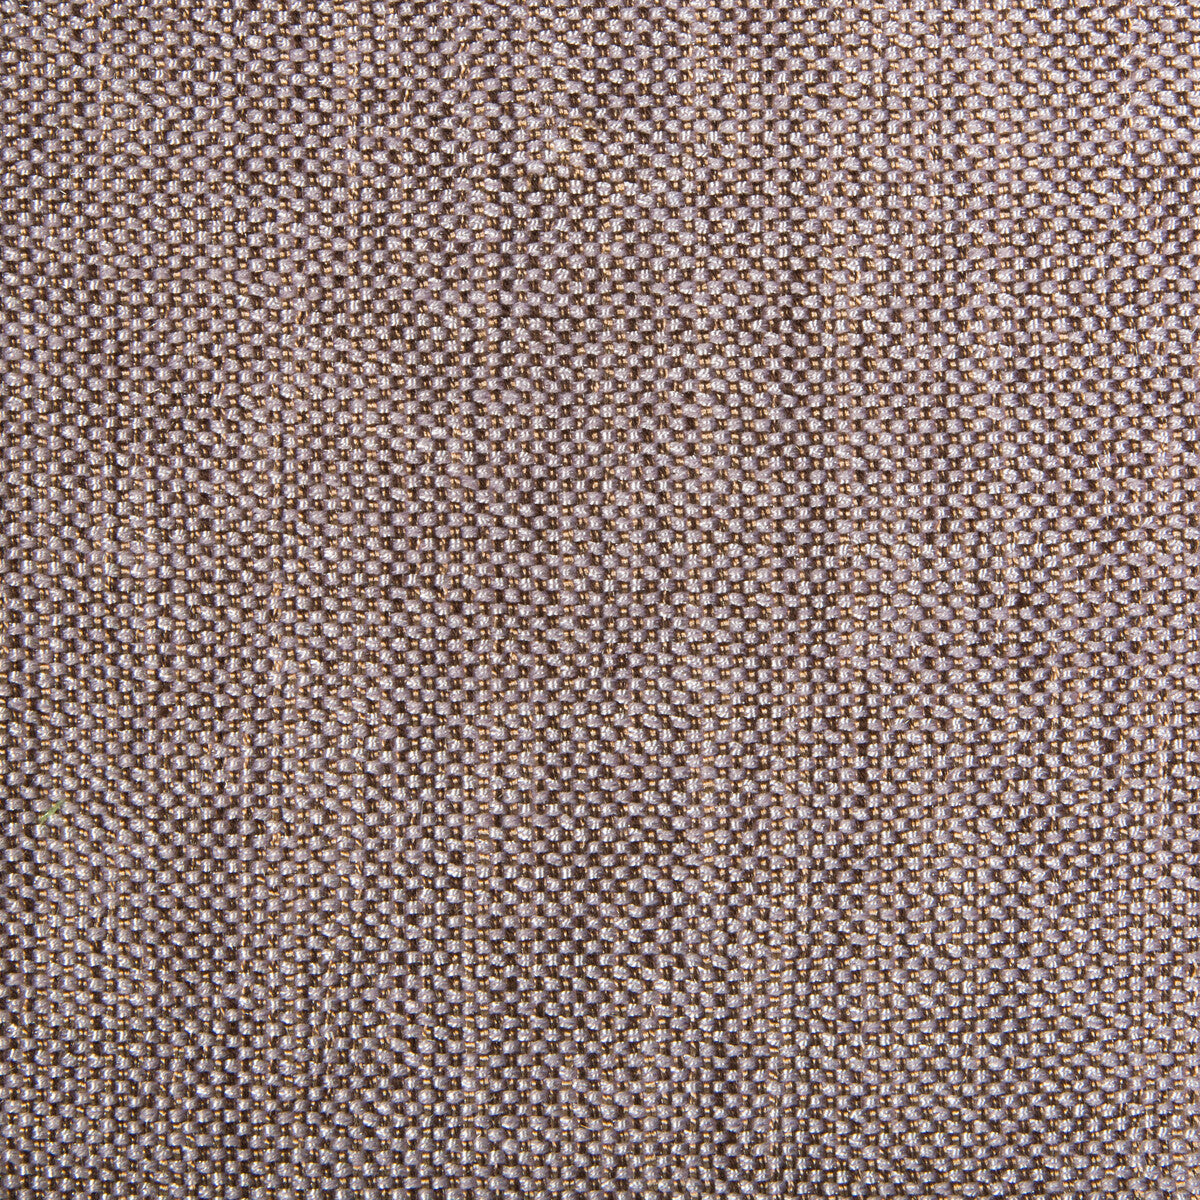 Kravet Contract fabric in 4458-110 color - pattern 4458.110.0 - by Kravet Contract